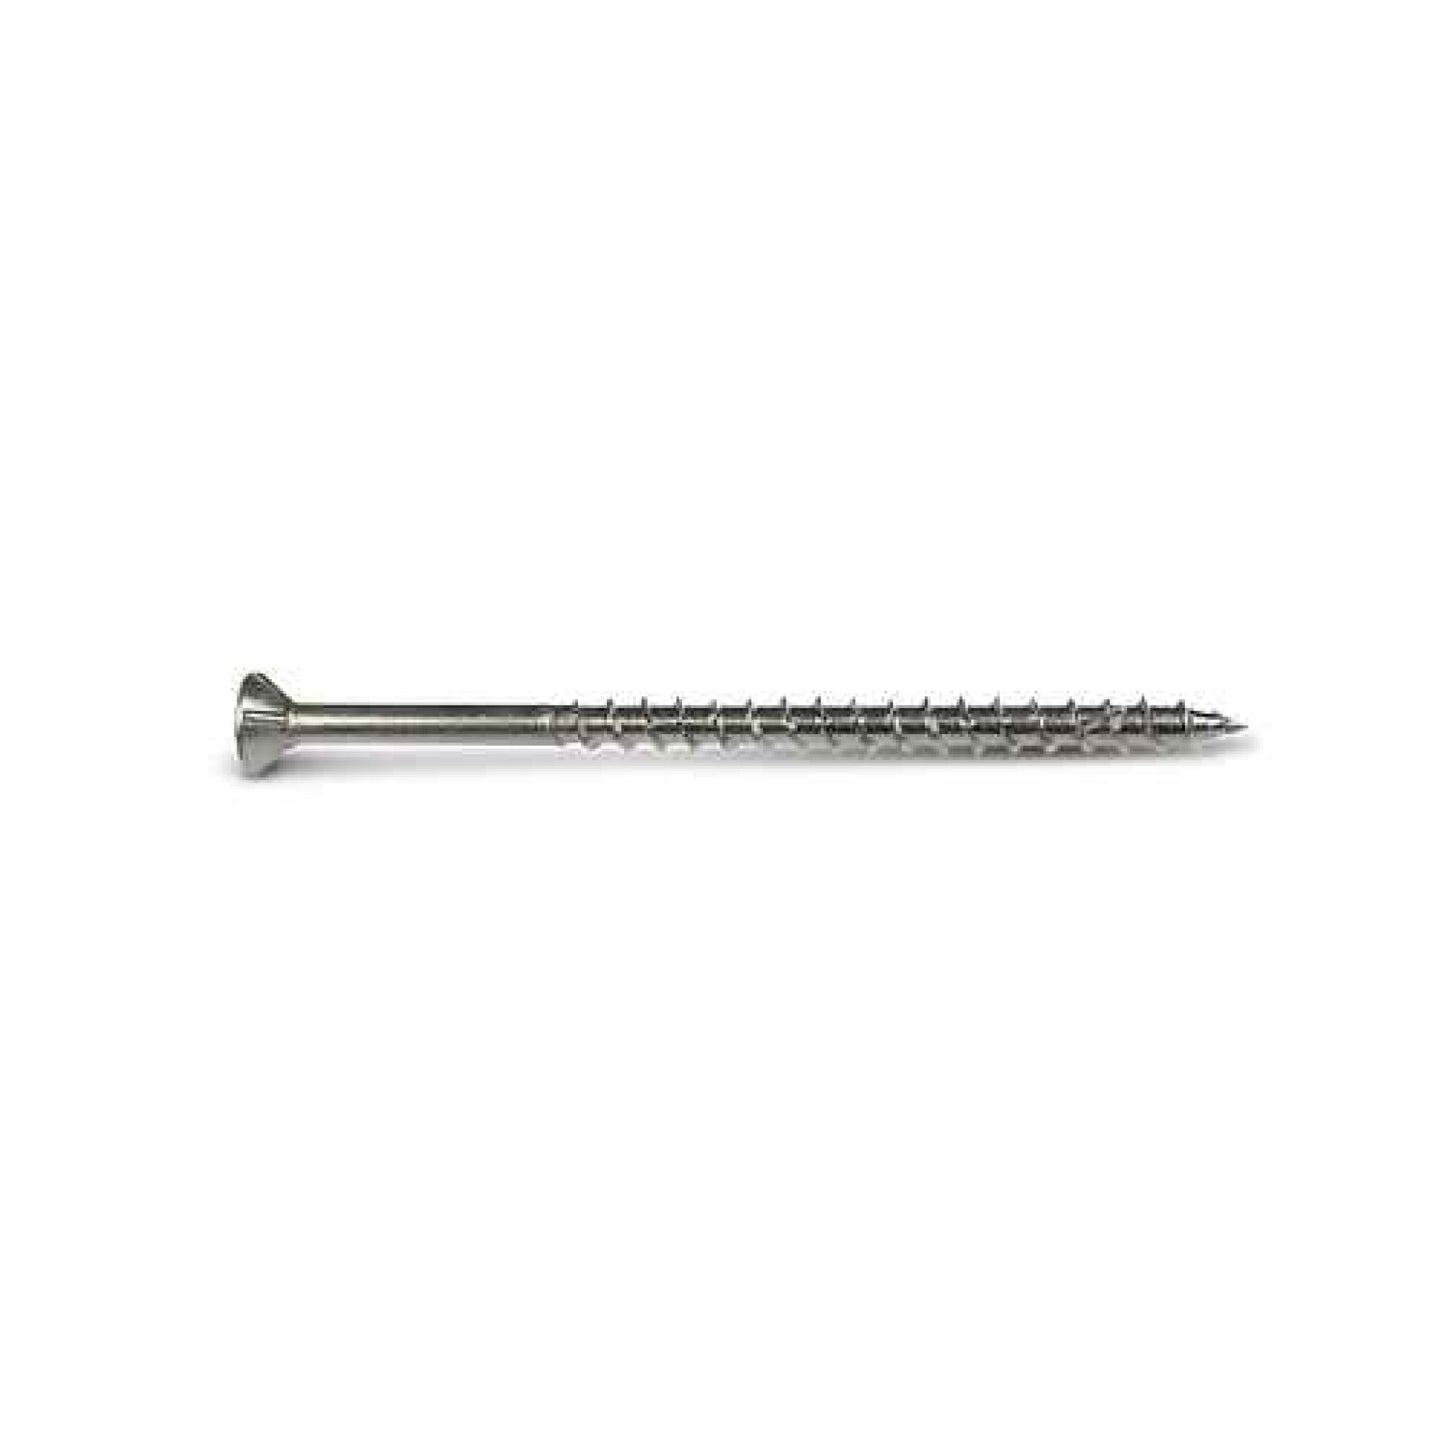 #14 x 5" Simpson Strong-Drive DWP WOOD SS Screw, 1lb (21 Fasteners)